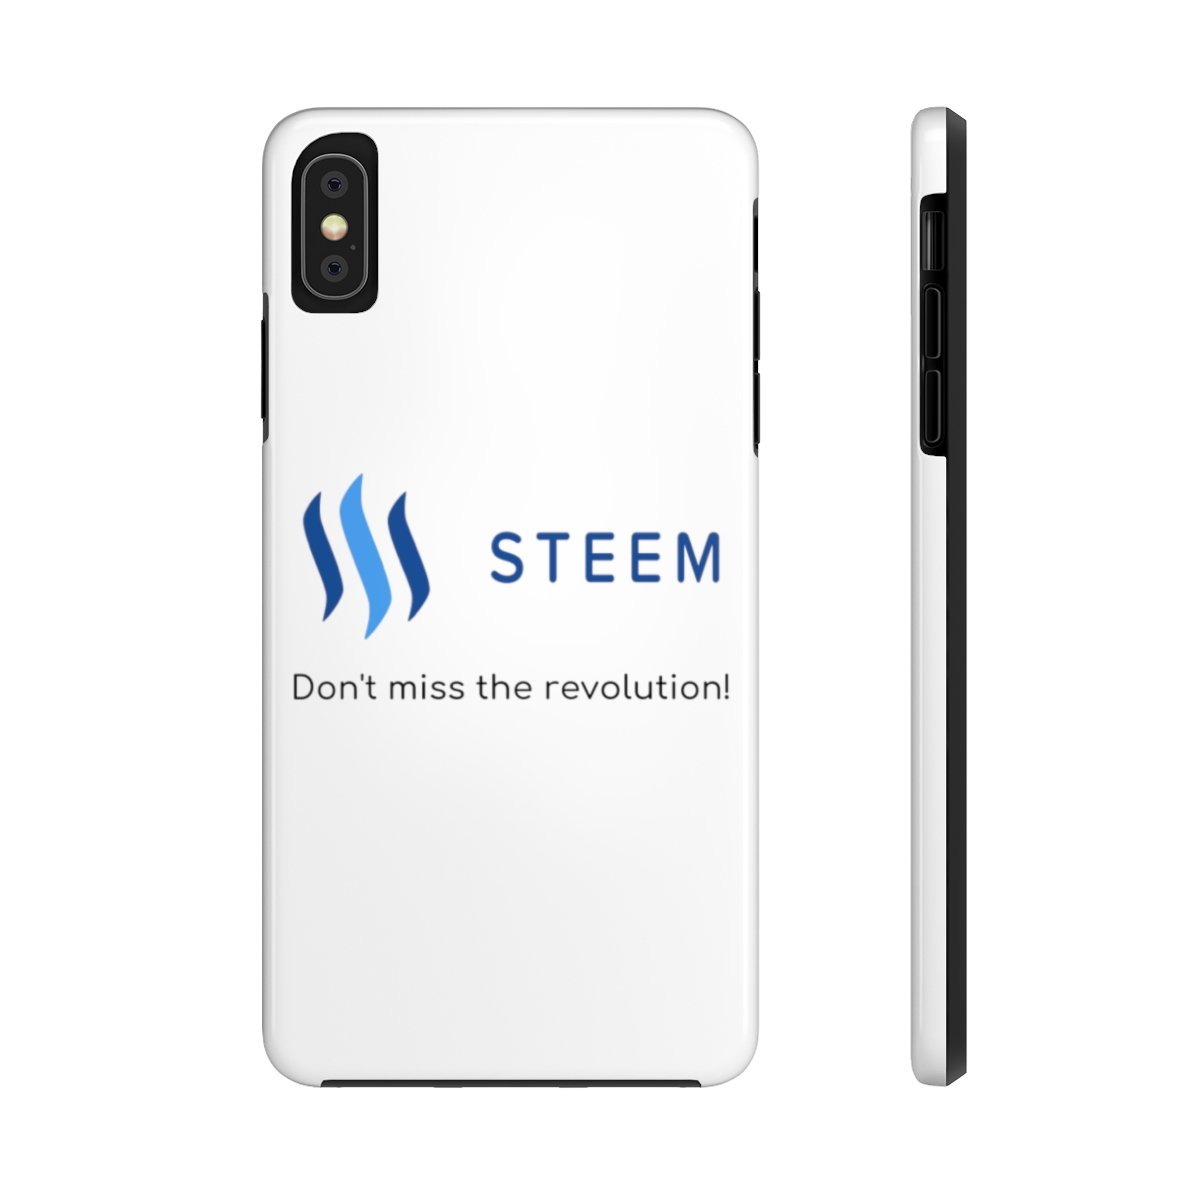 iPhone XS MAX Official Crypto  Merch